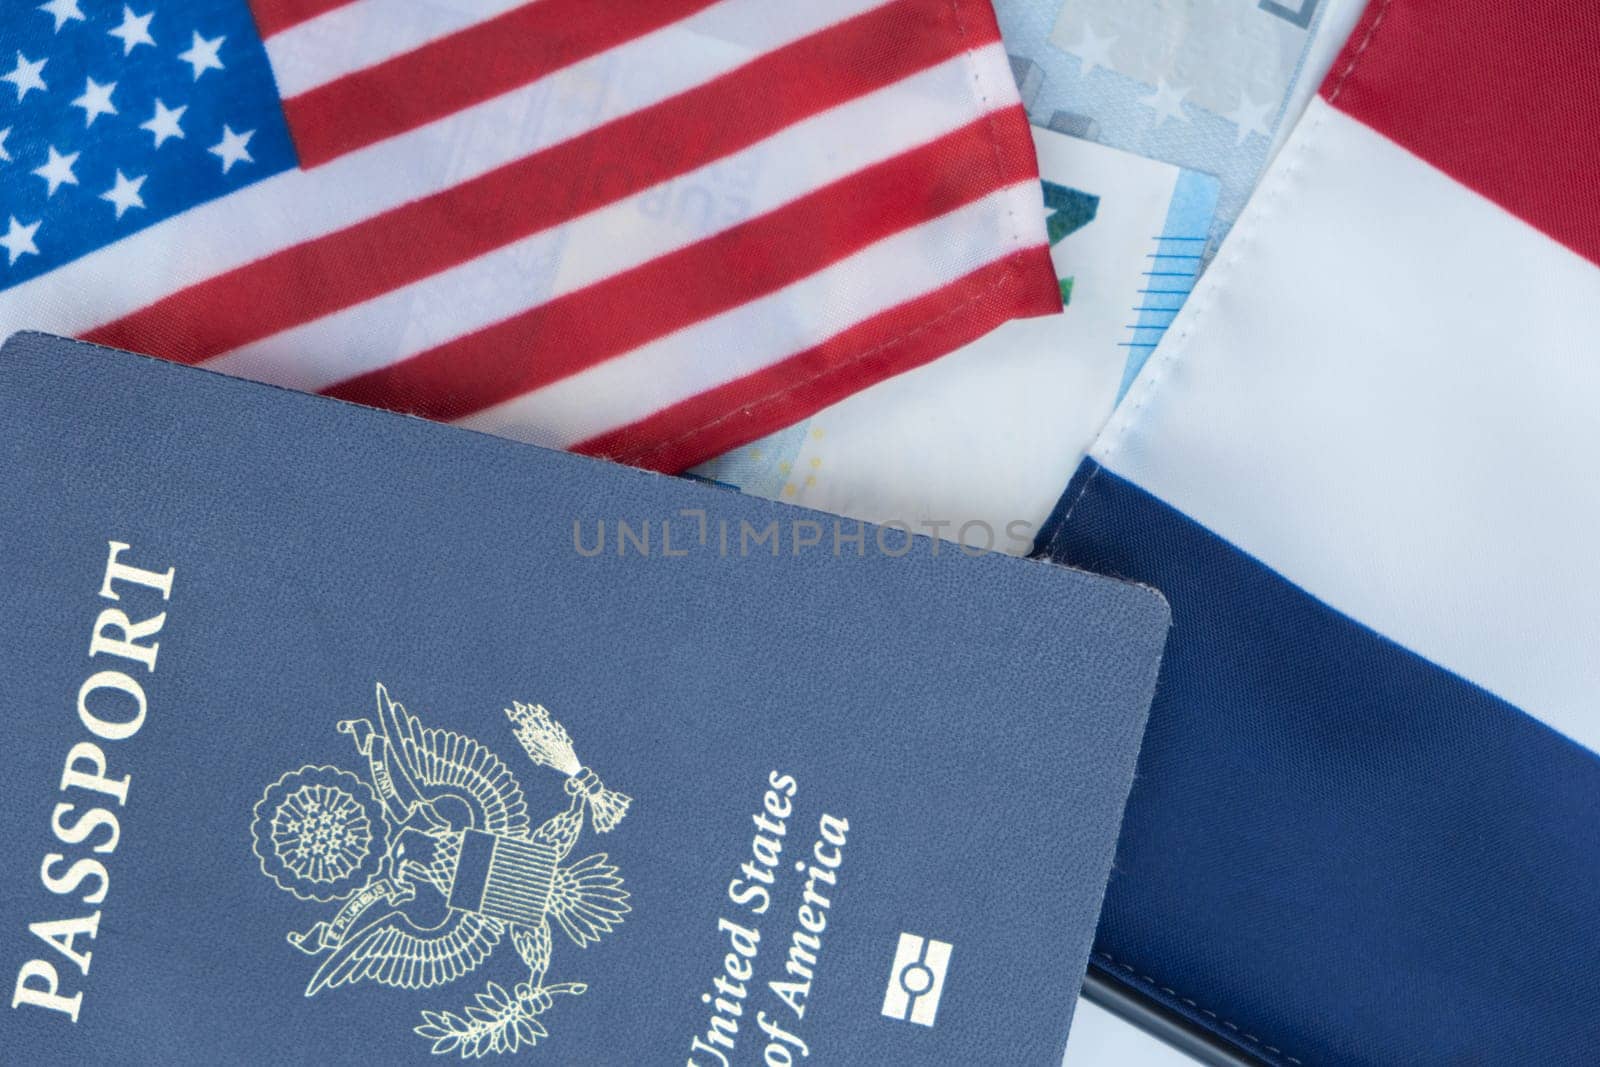 United States and France passports on Euro currency transparent background. Flat lay. Concept of business, trade, friendship, employment, vacation travel. Concept coming summer Olympics. Closeup photo high quality photo.